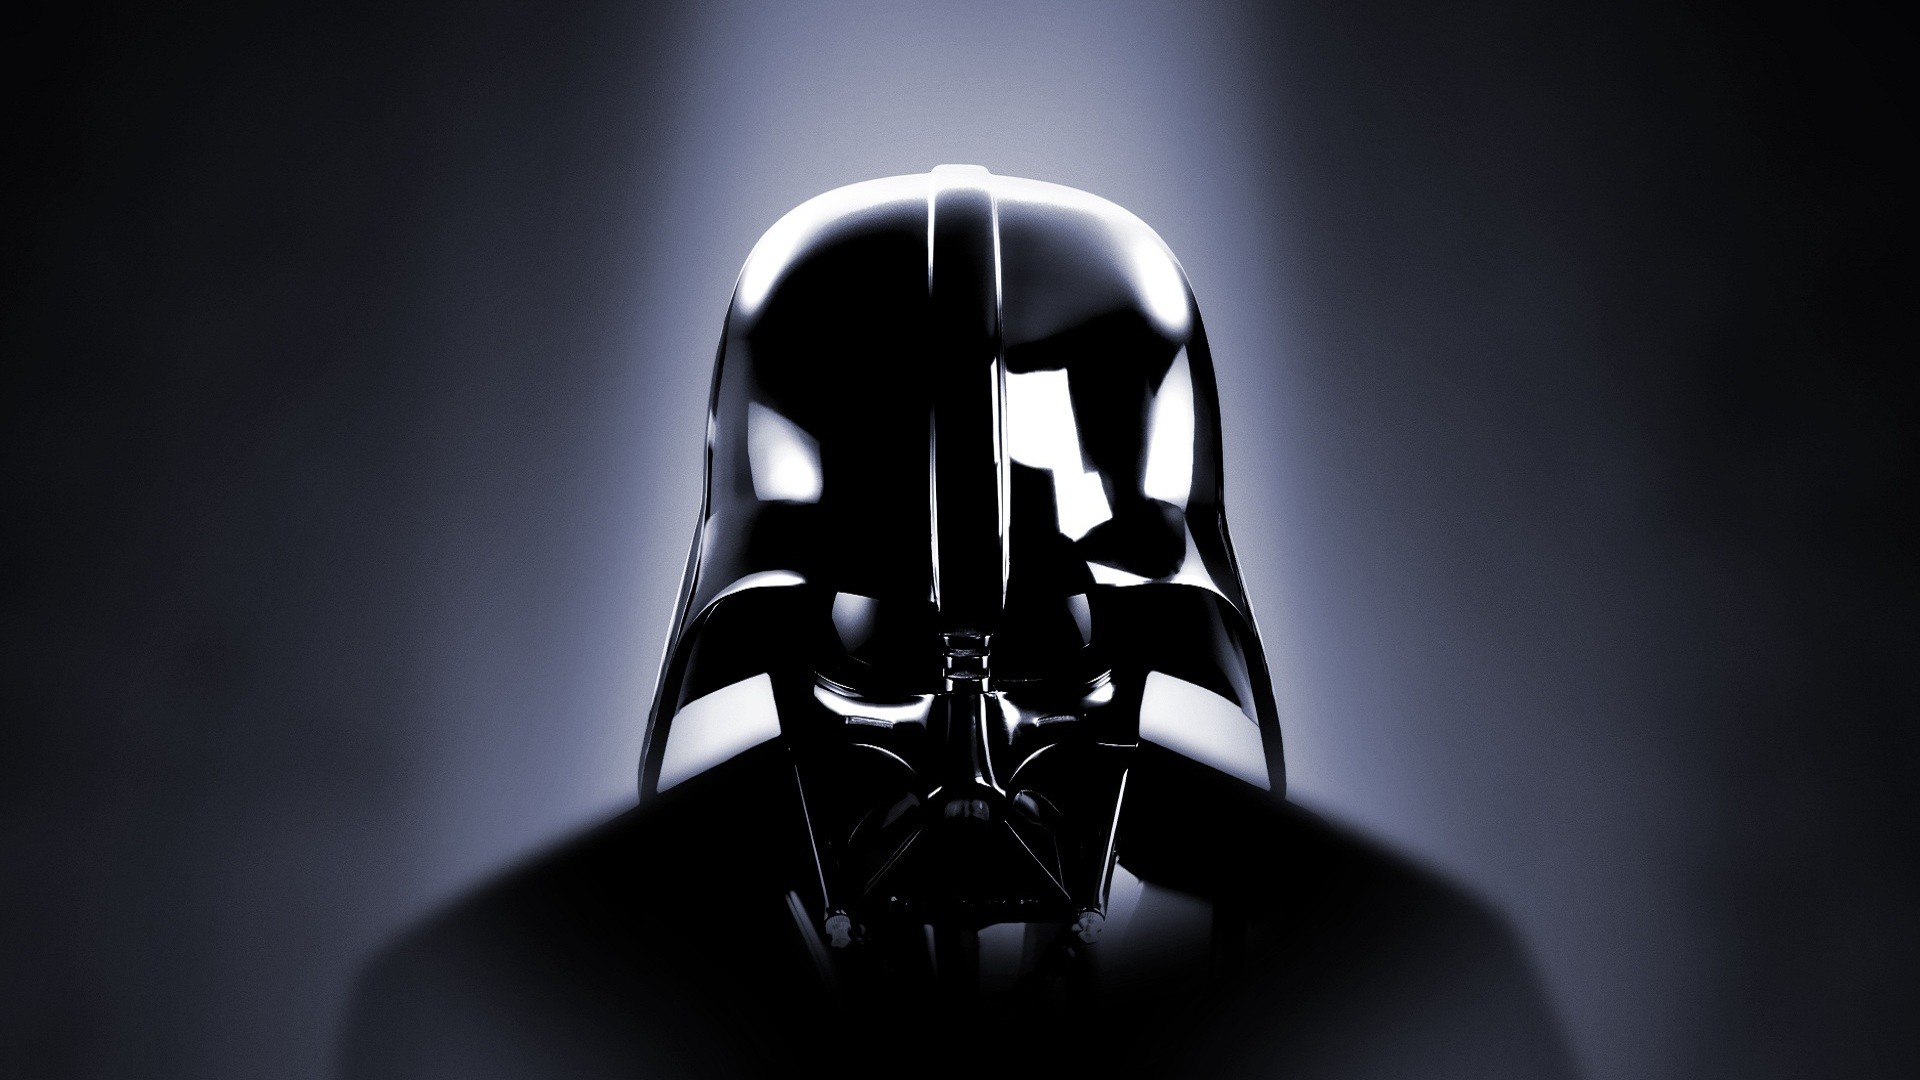 1920x1080 Download the best Darth Vader Wallpapers media for free. View and share our  Darth Vader